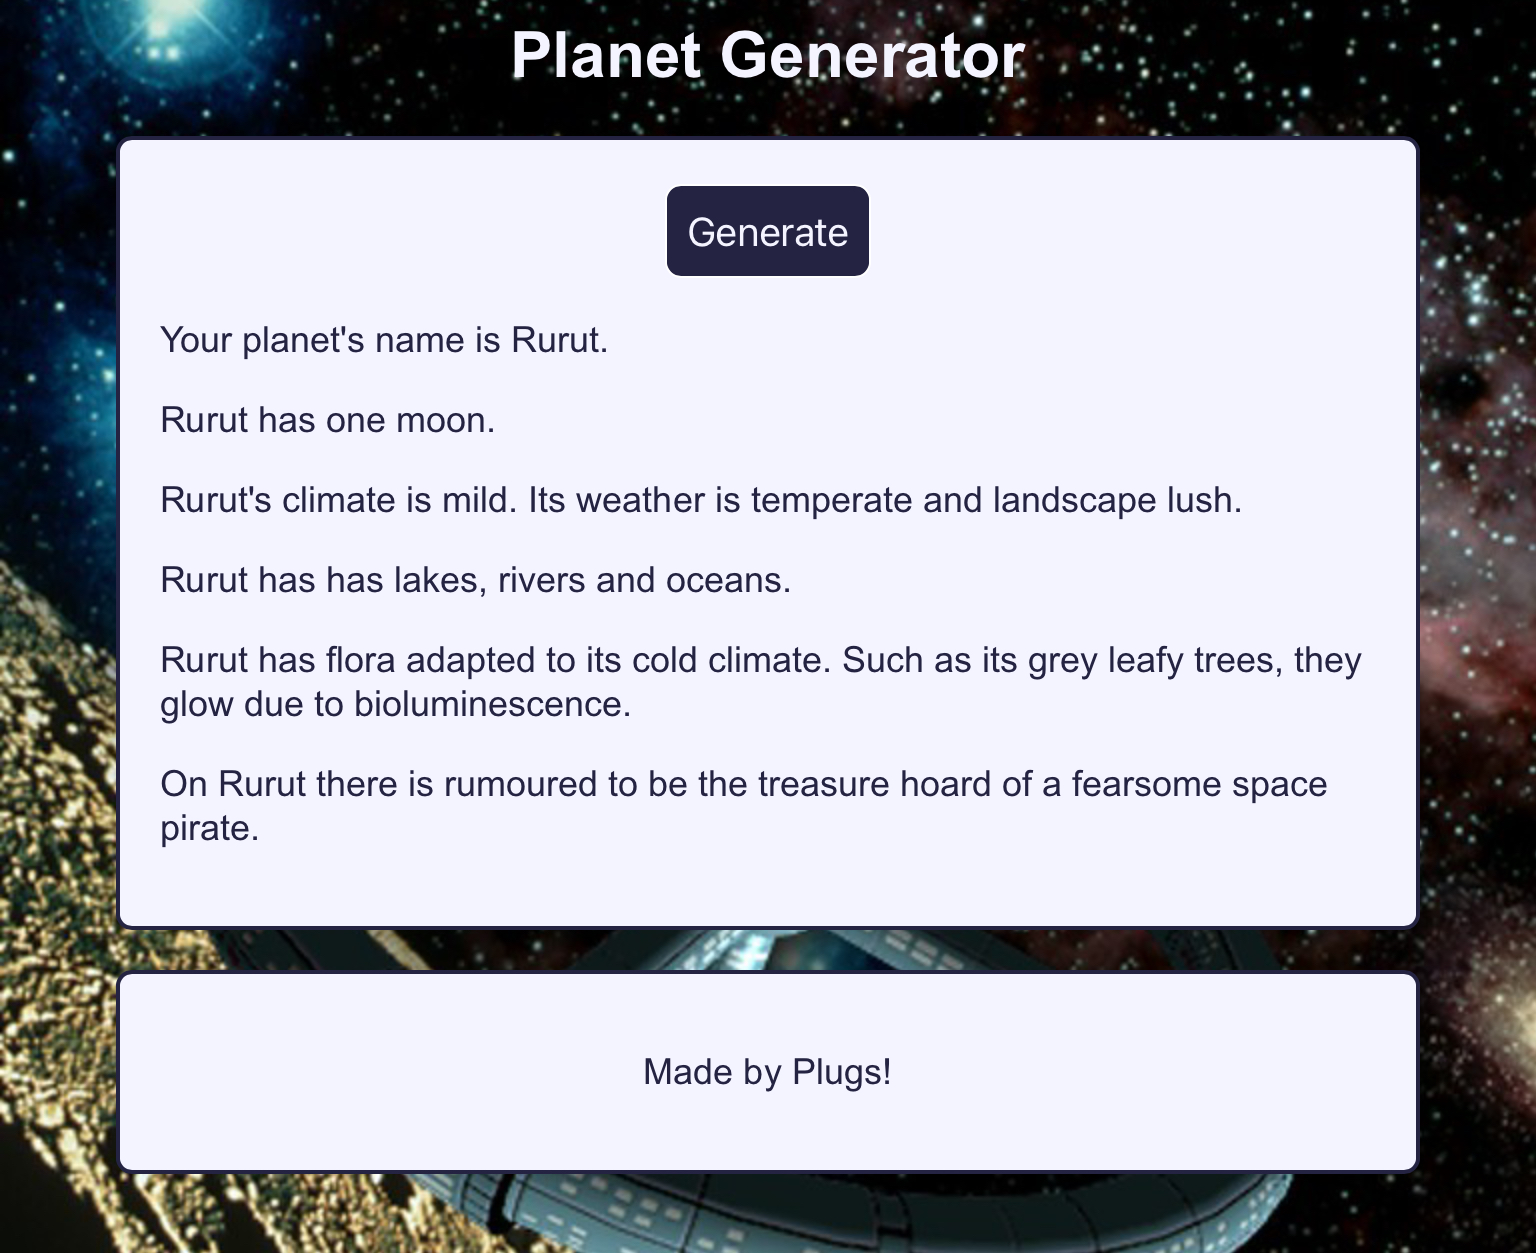 An example of a generated planet